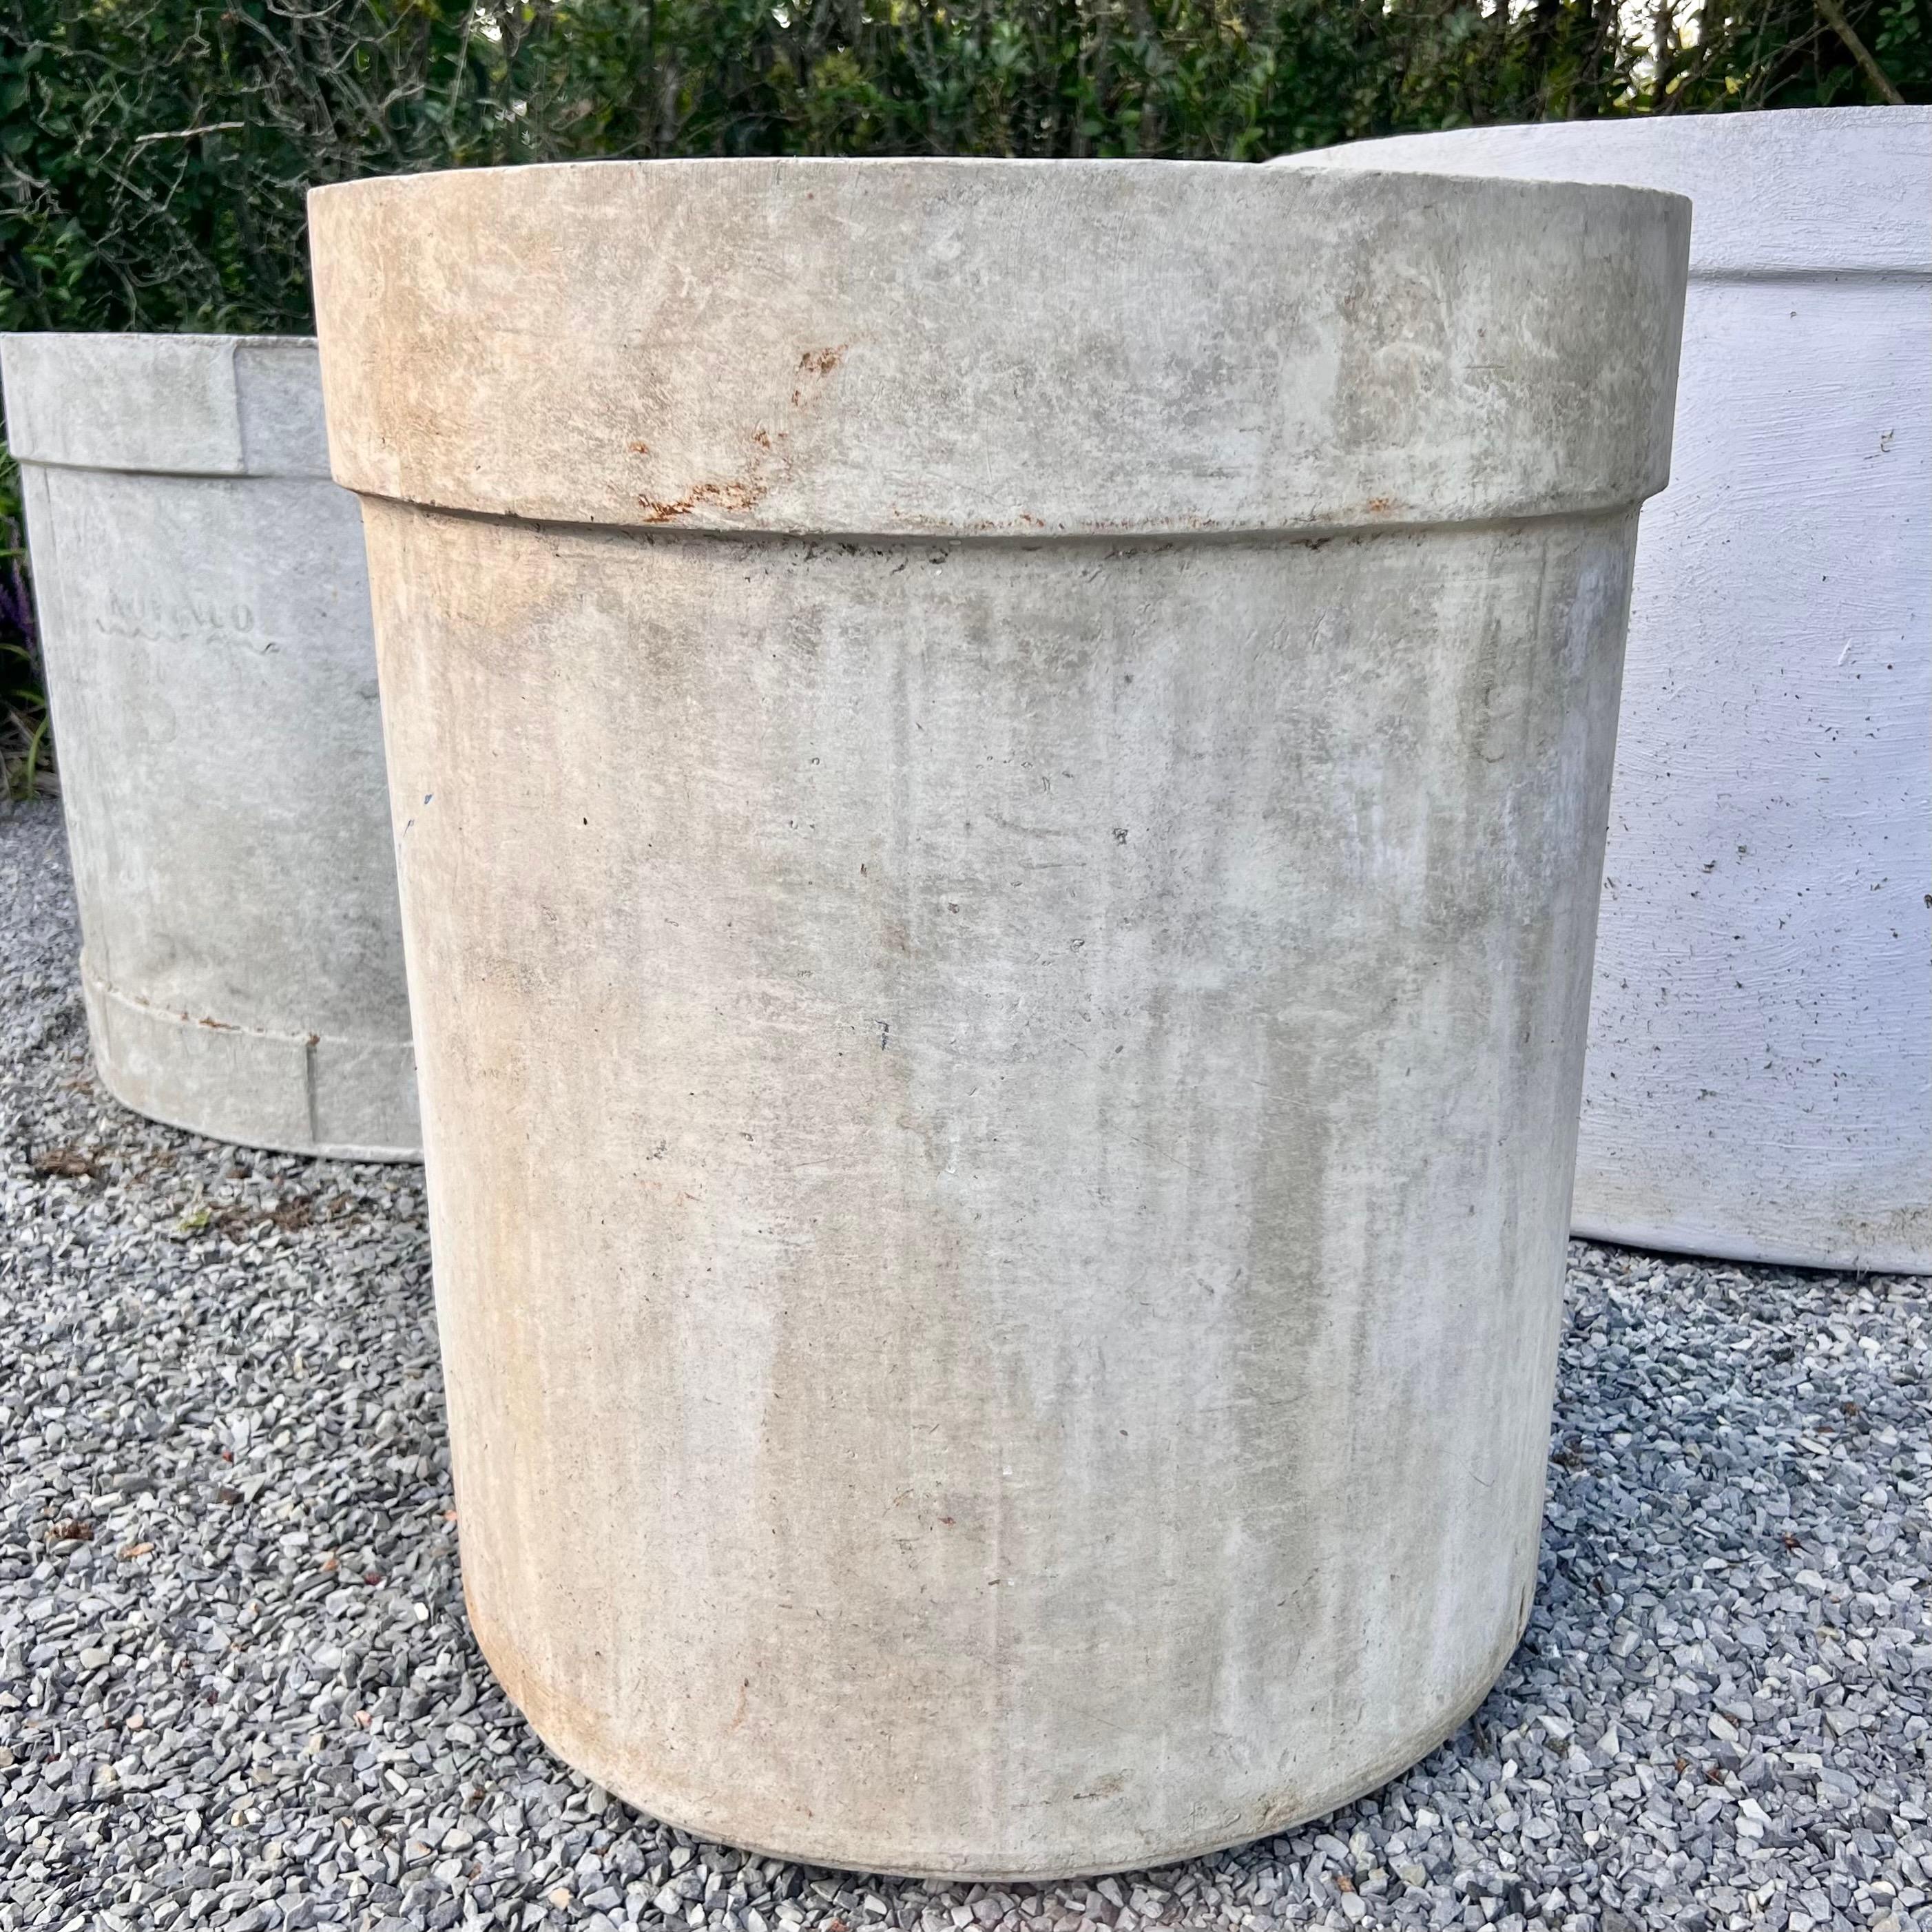 Gigantic tree planter by the Swiss design house Eternit. Very difficult to find vintage planters large enough to plant and hold a large tree. This would make a wonderful and functional piece for your home or garden. The planter features beautiful